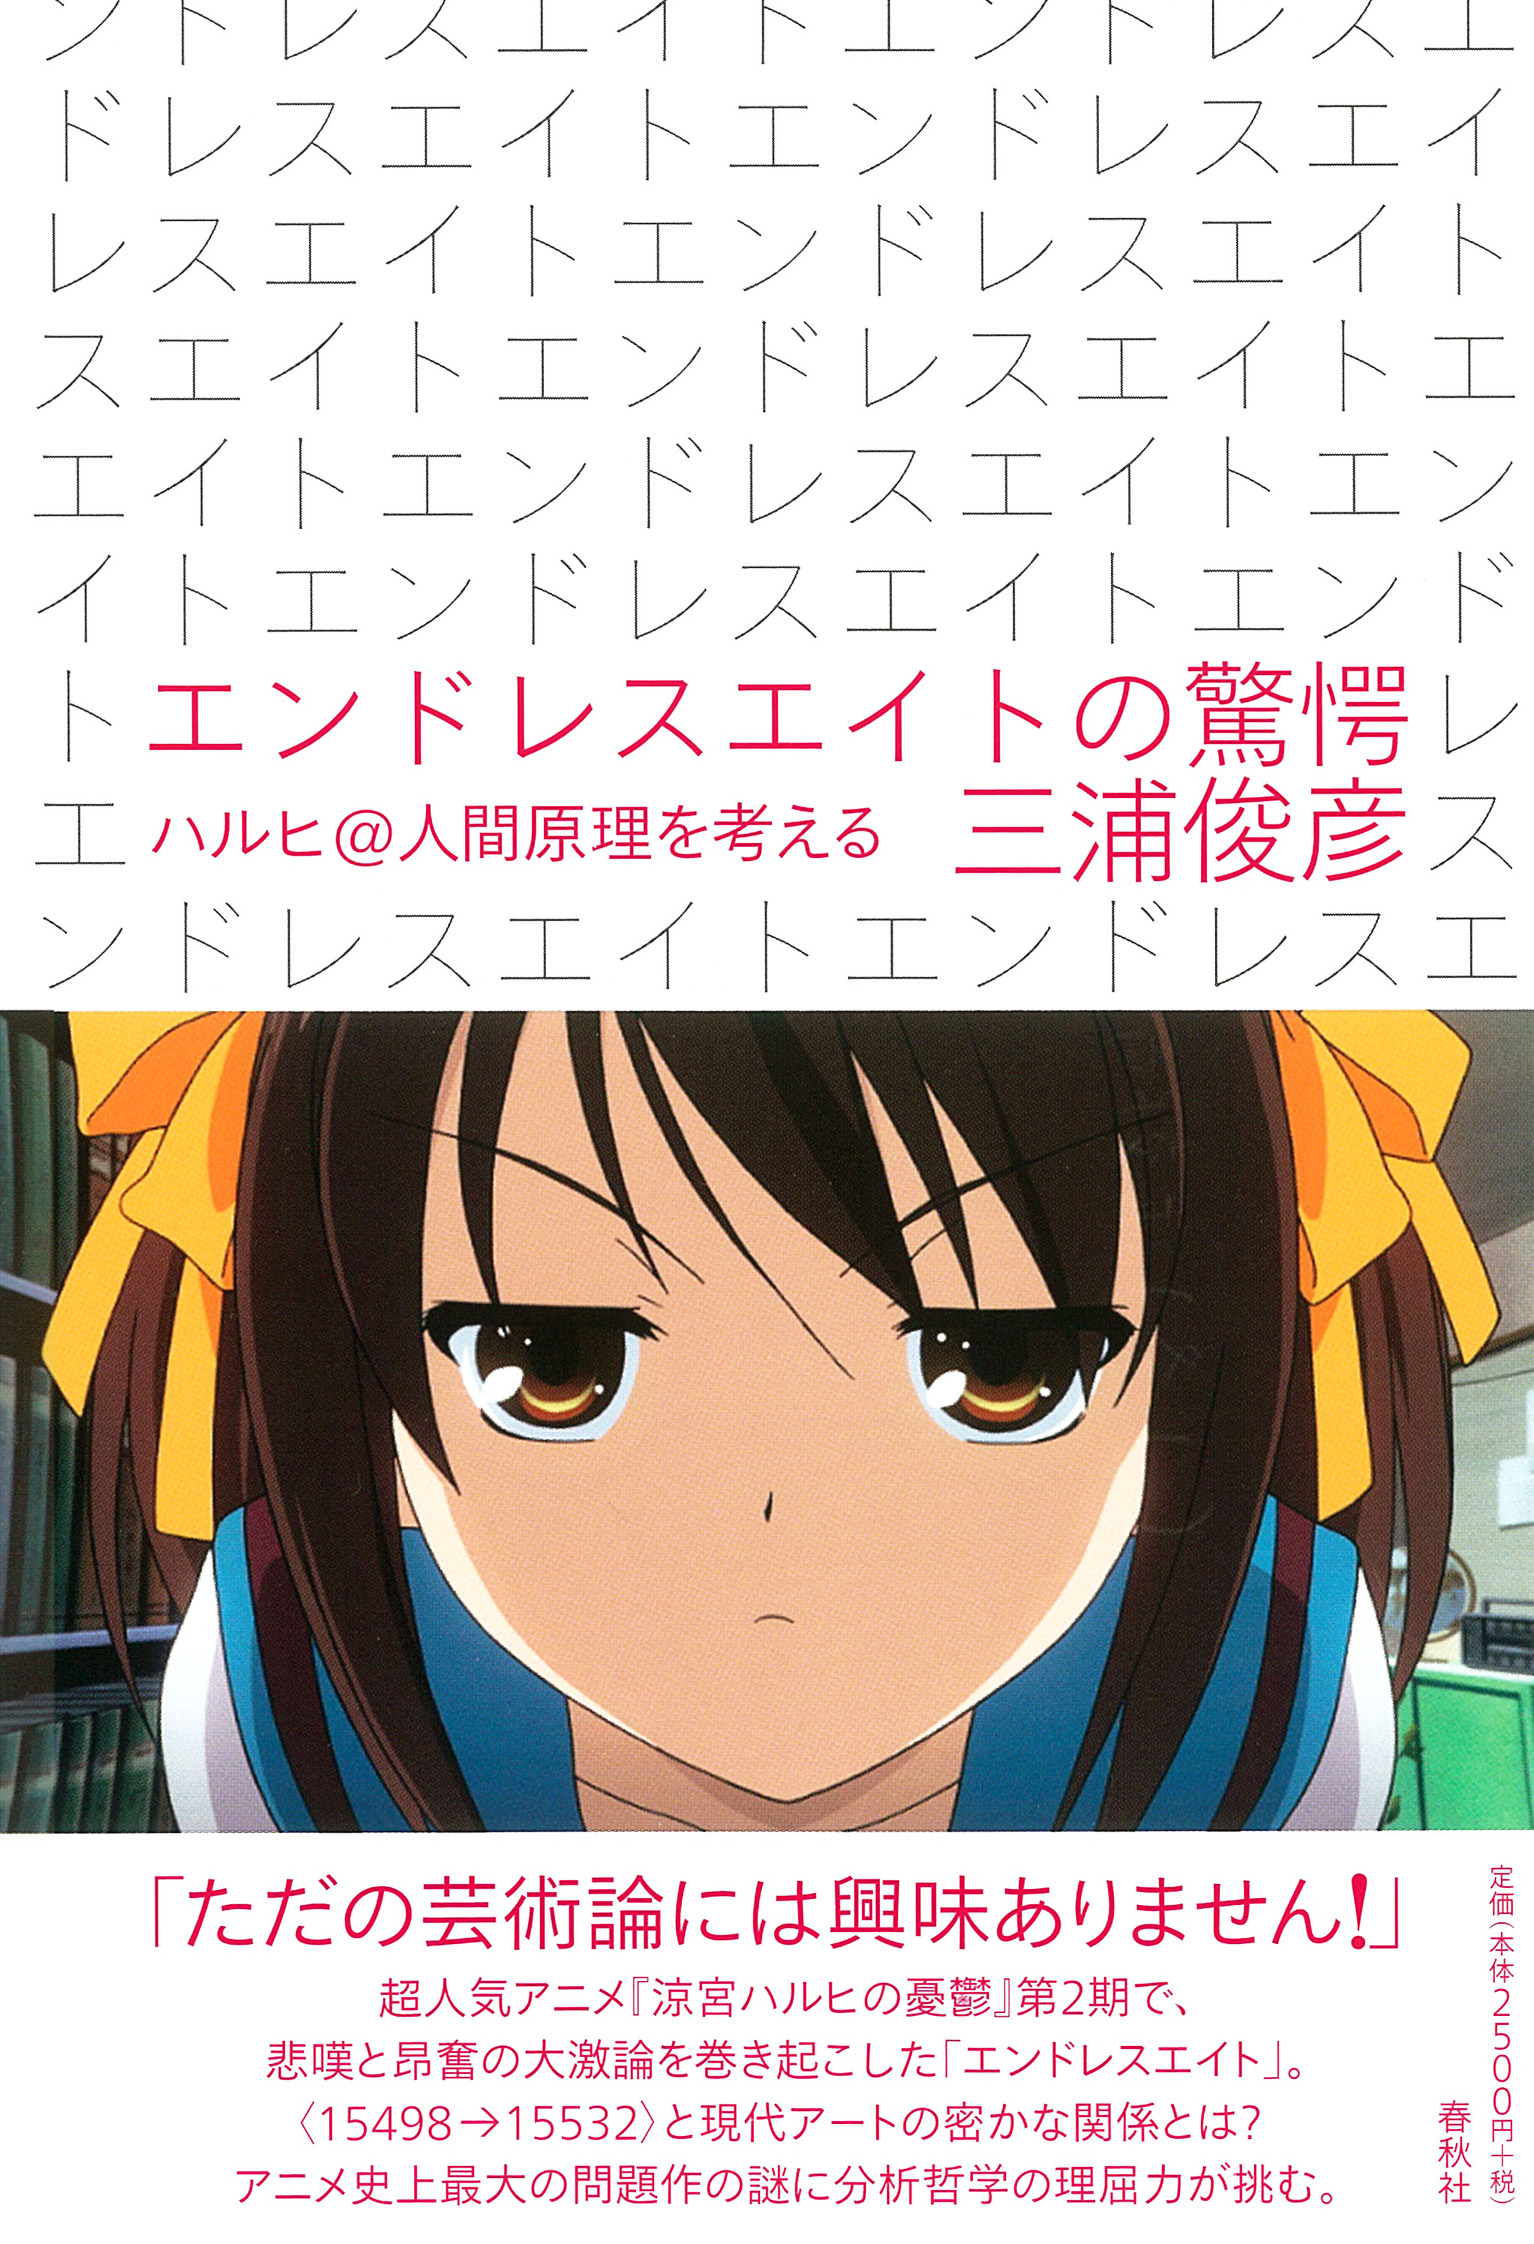 A cover with an illustration of Haruhi and typography design of Endless Eight